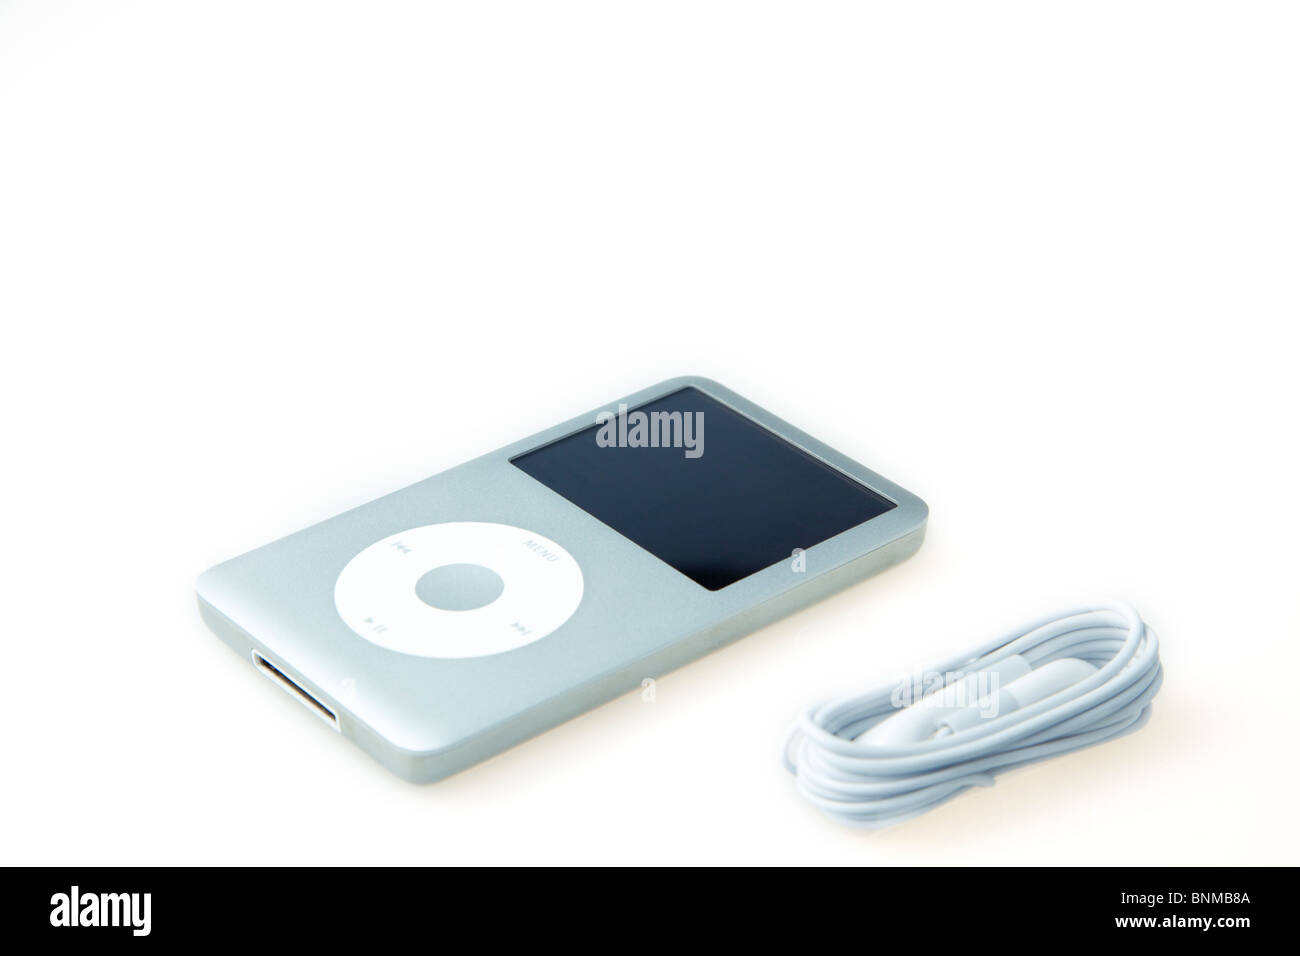 Music, Portable MP3 Player, Apple i-pod classic 120Gb. Music Player  Recorded Audio MP3 Personal Portable Pocket Silver Grey Gray Stock Photo -  Alamy